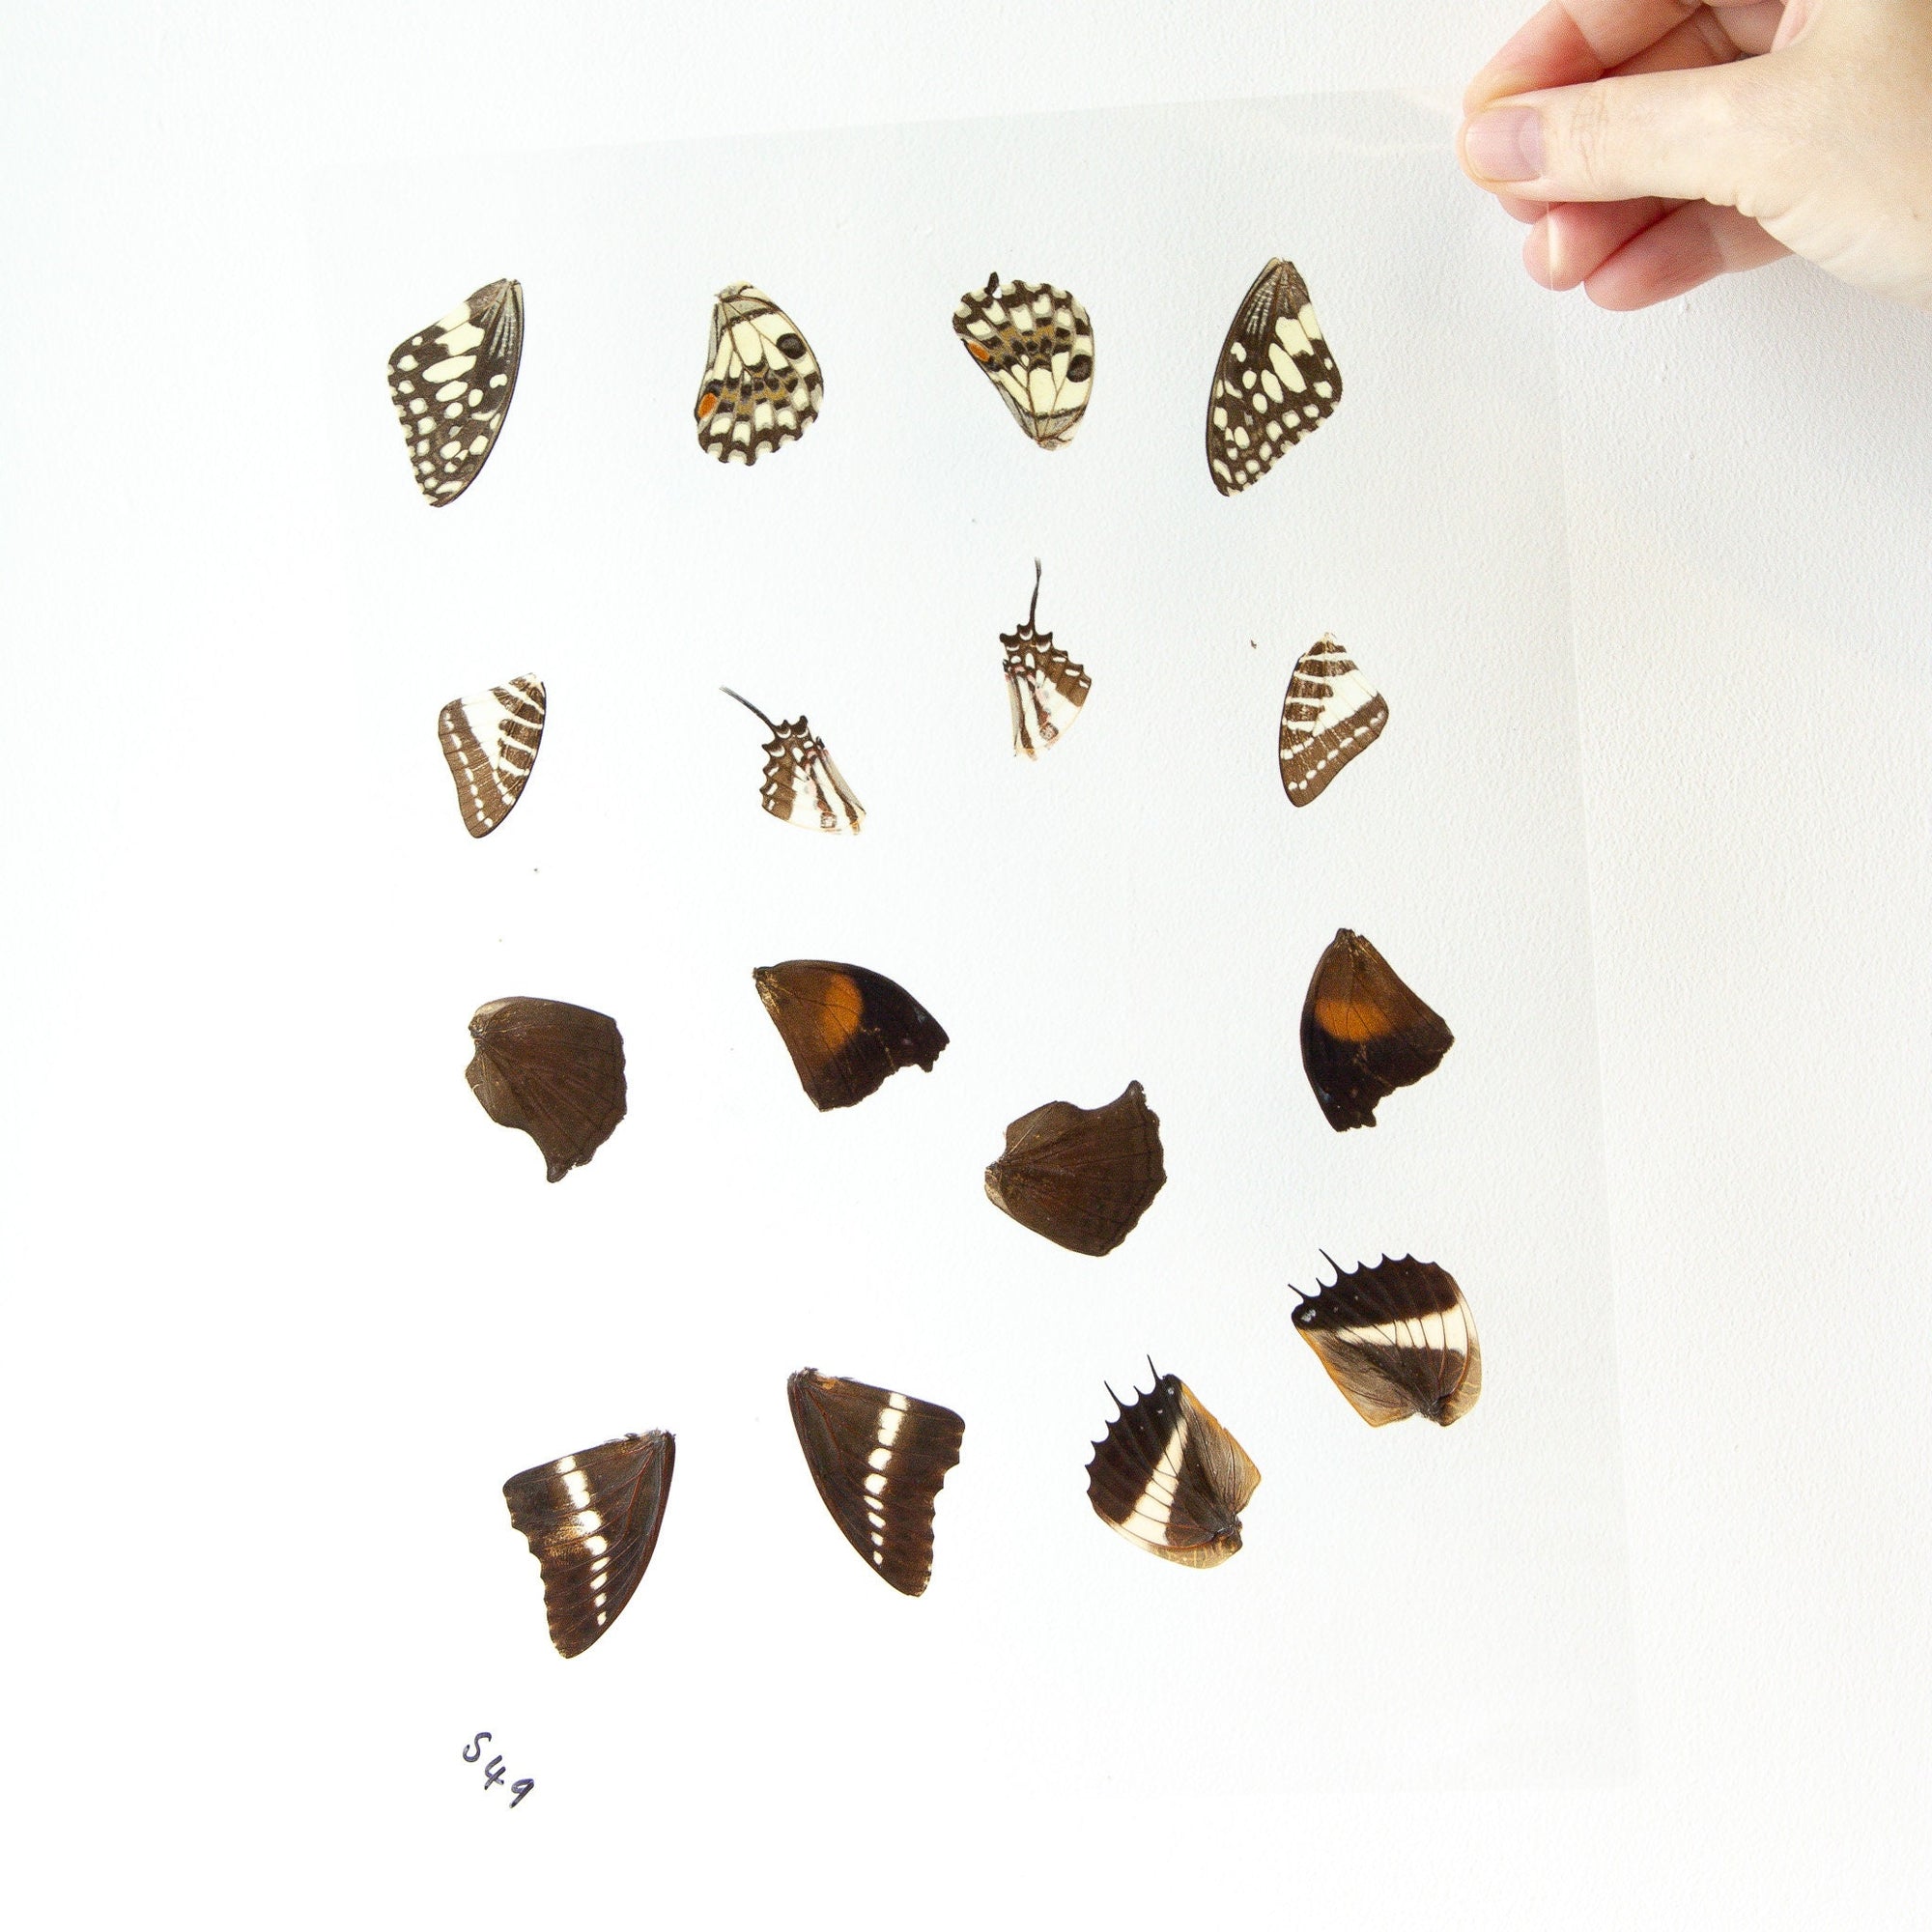 Butterfly Wings GLOSSY LAMINATED SHEET Real Ethically Sourced Specimens Moths Butterflies Wings for Art -- S49